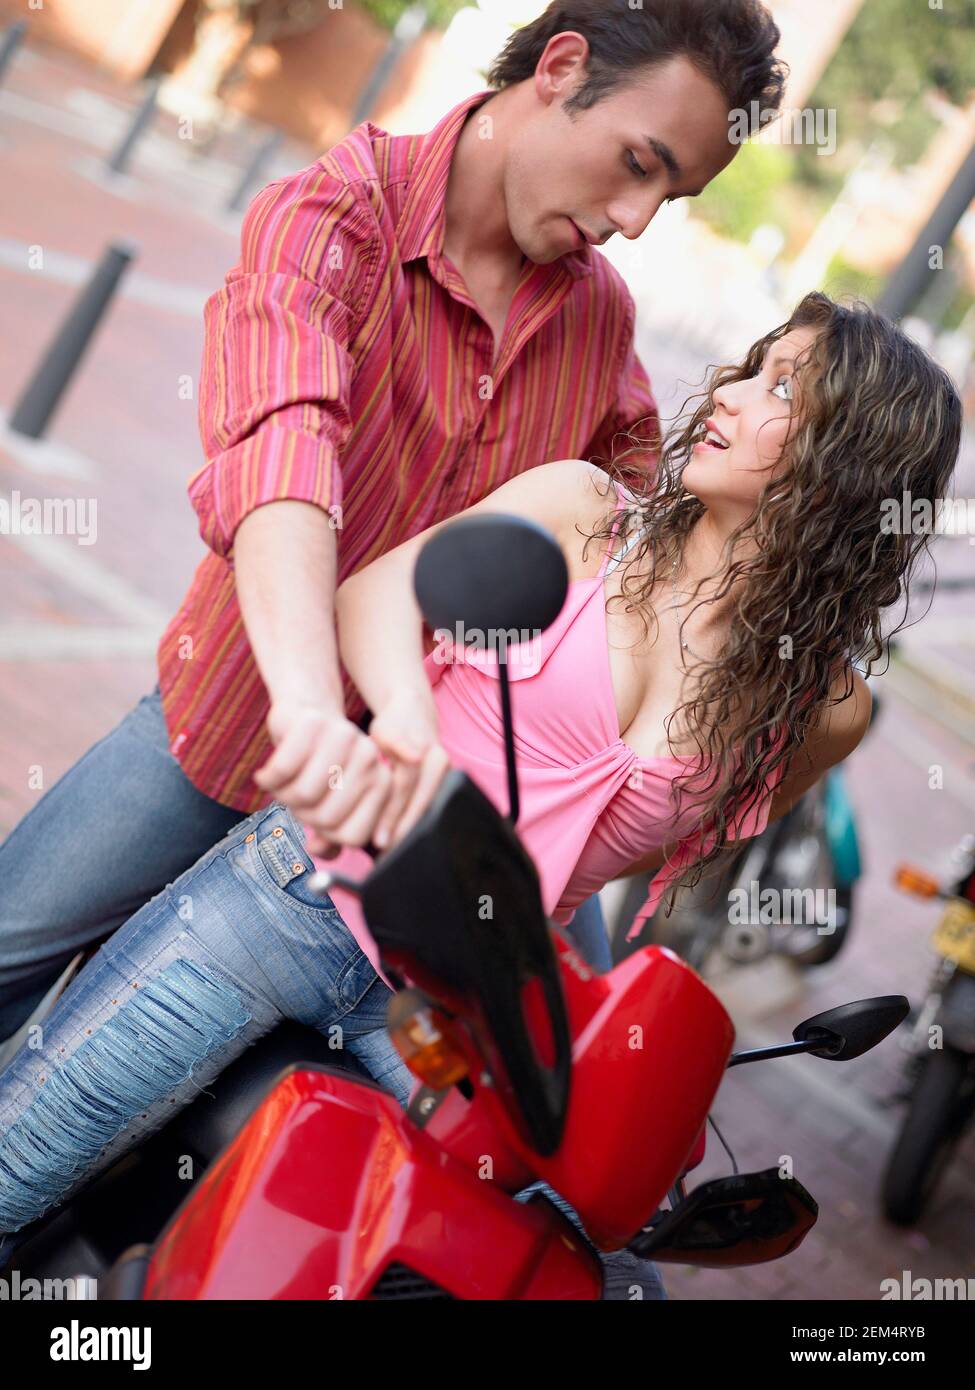 Young man teaching a young woman how to drive a motor scooter Stock Photo